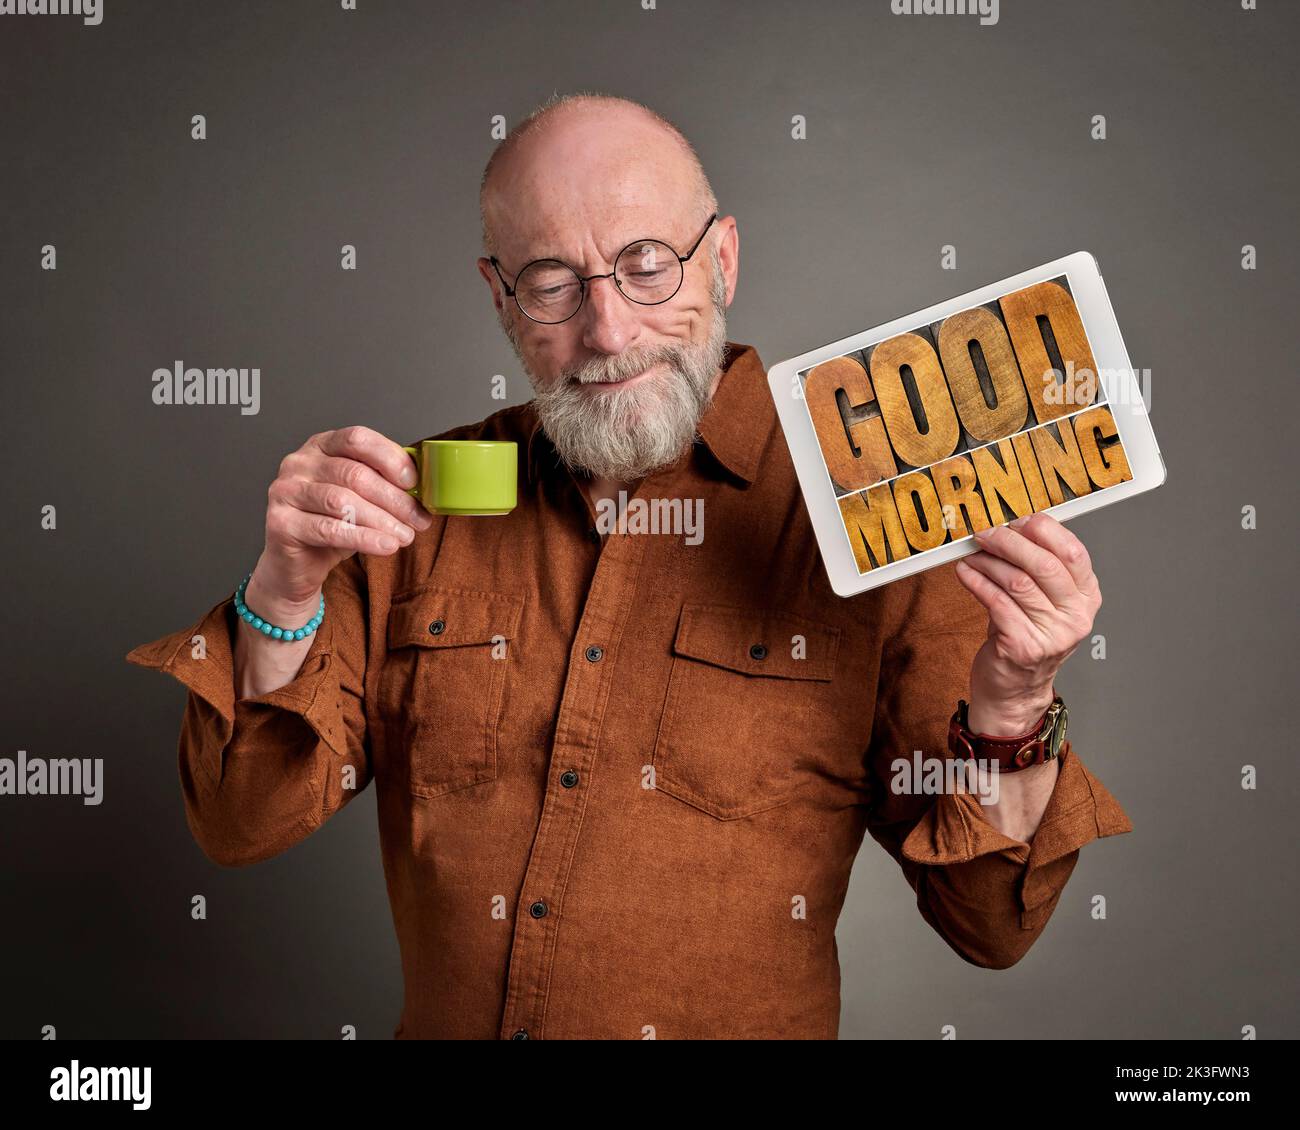 Good Morning - smiling senior man is drinking coffee and showing a digital tablet with text in wood type, positive start of  a new day concept Stock Photo